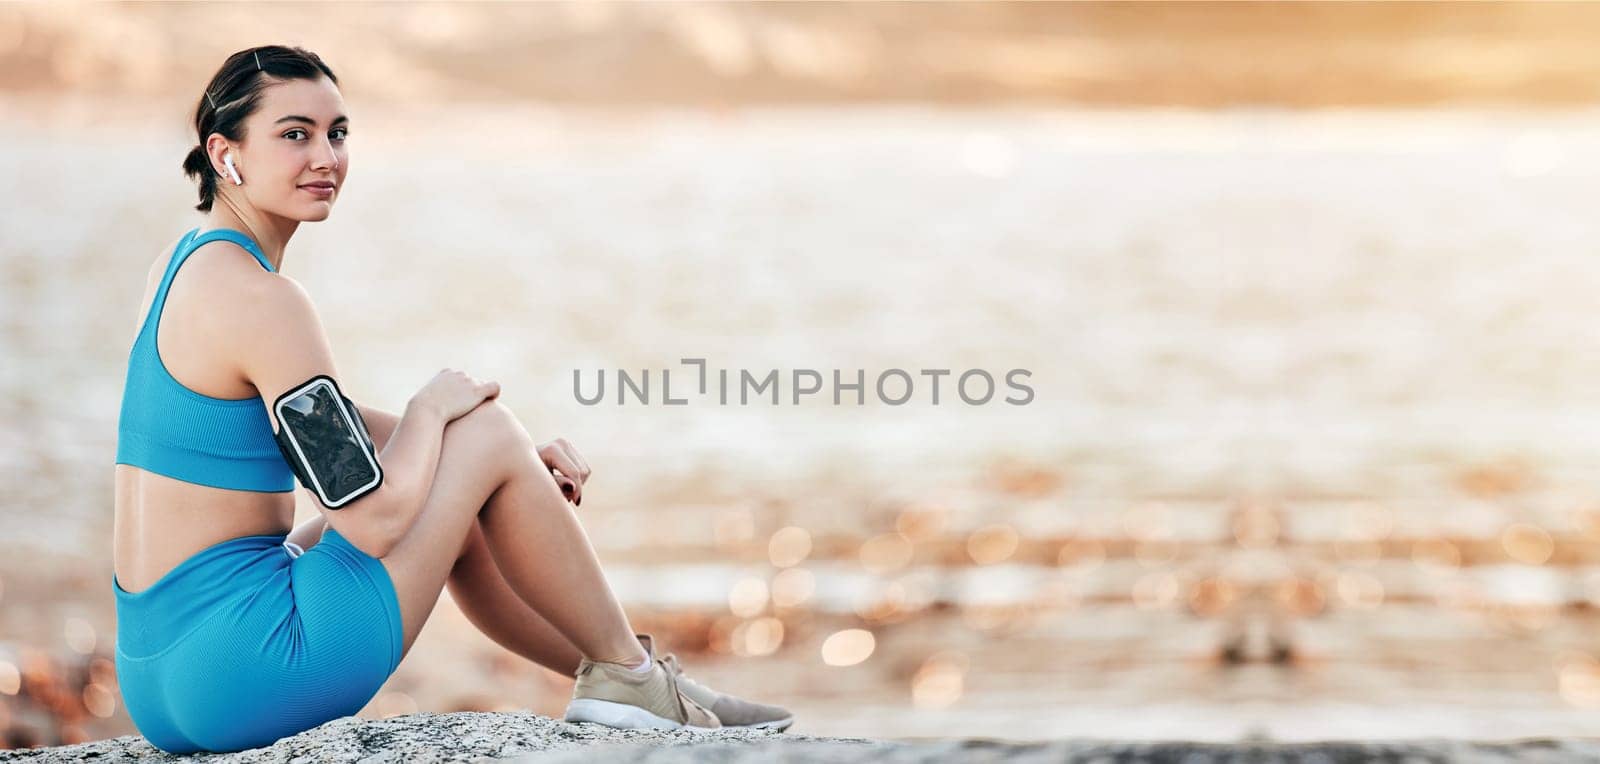 Workout, beach sunset or portrait of woman relax after outdoor running, sports training or fitness performance. Nature exercise mockup, waves or runner at sea for mental health, calm or freedom peace by YuriArcurs